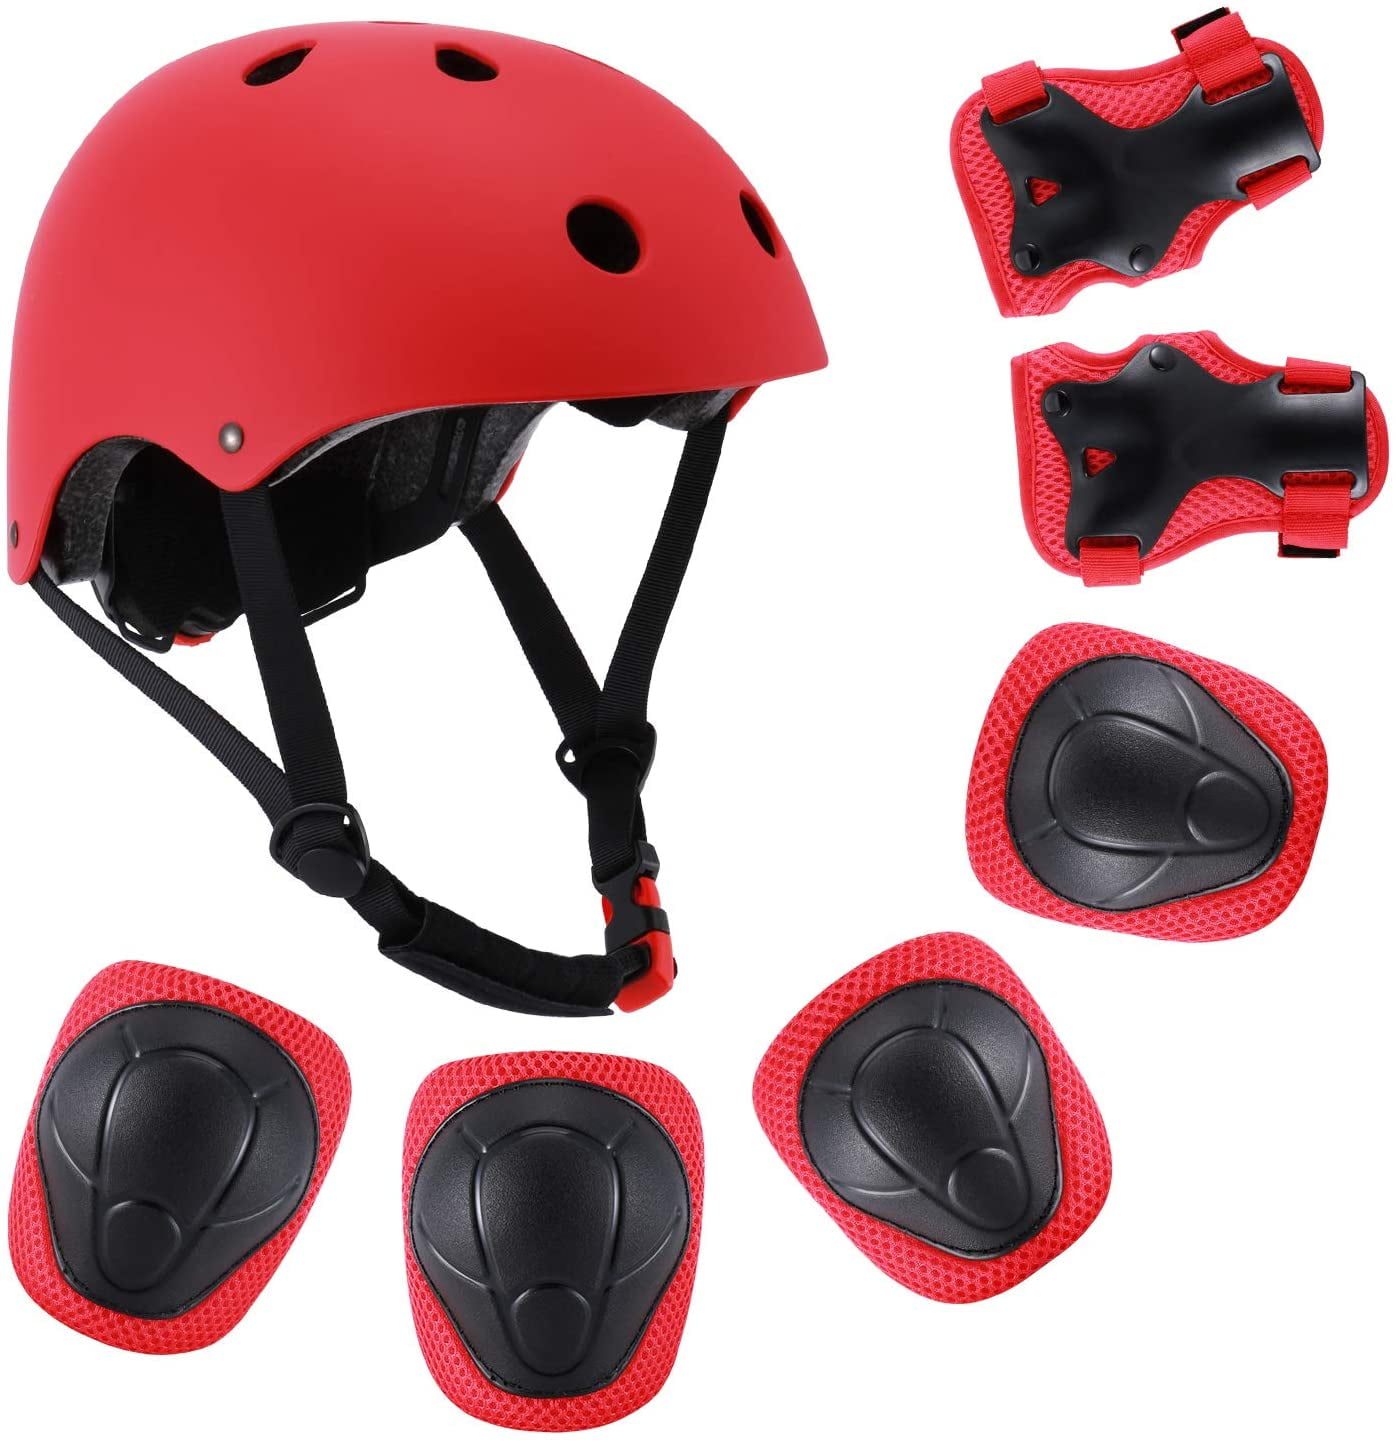 Toddler Helmet for Ages 3-8 Boys Girls with Sports Protective Gear Set Knee Elbow Wrist Pads for Skateboard Cycling Scooter Rollerblading Kids Bike Helmet 